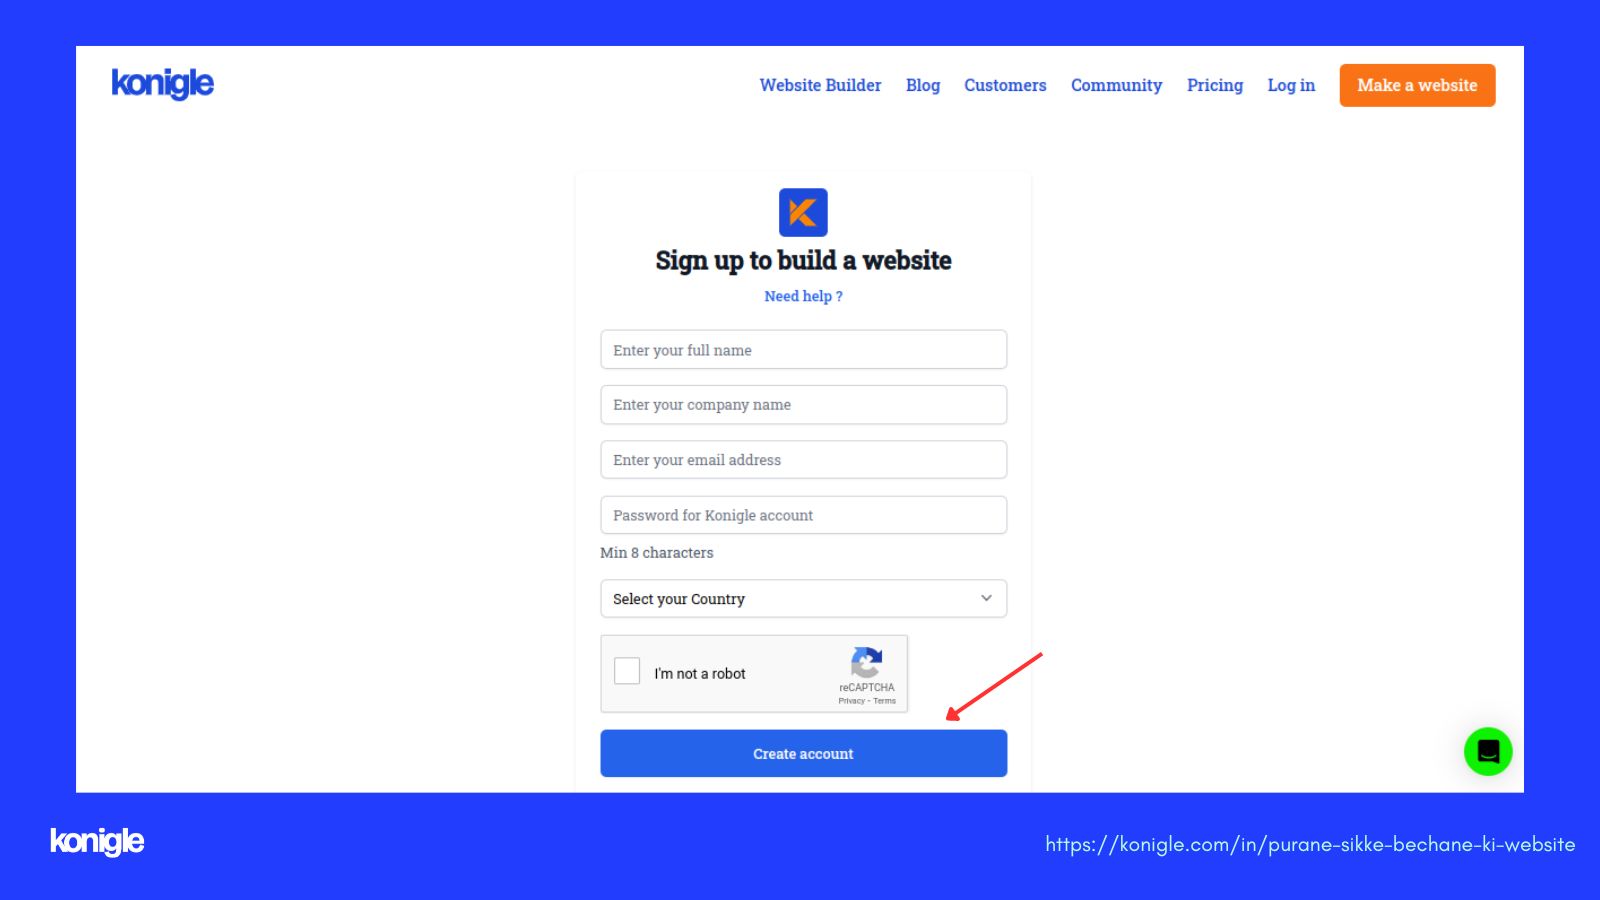 Konigle sign-up flow - Create an account